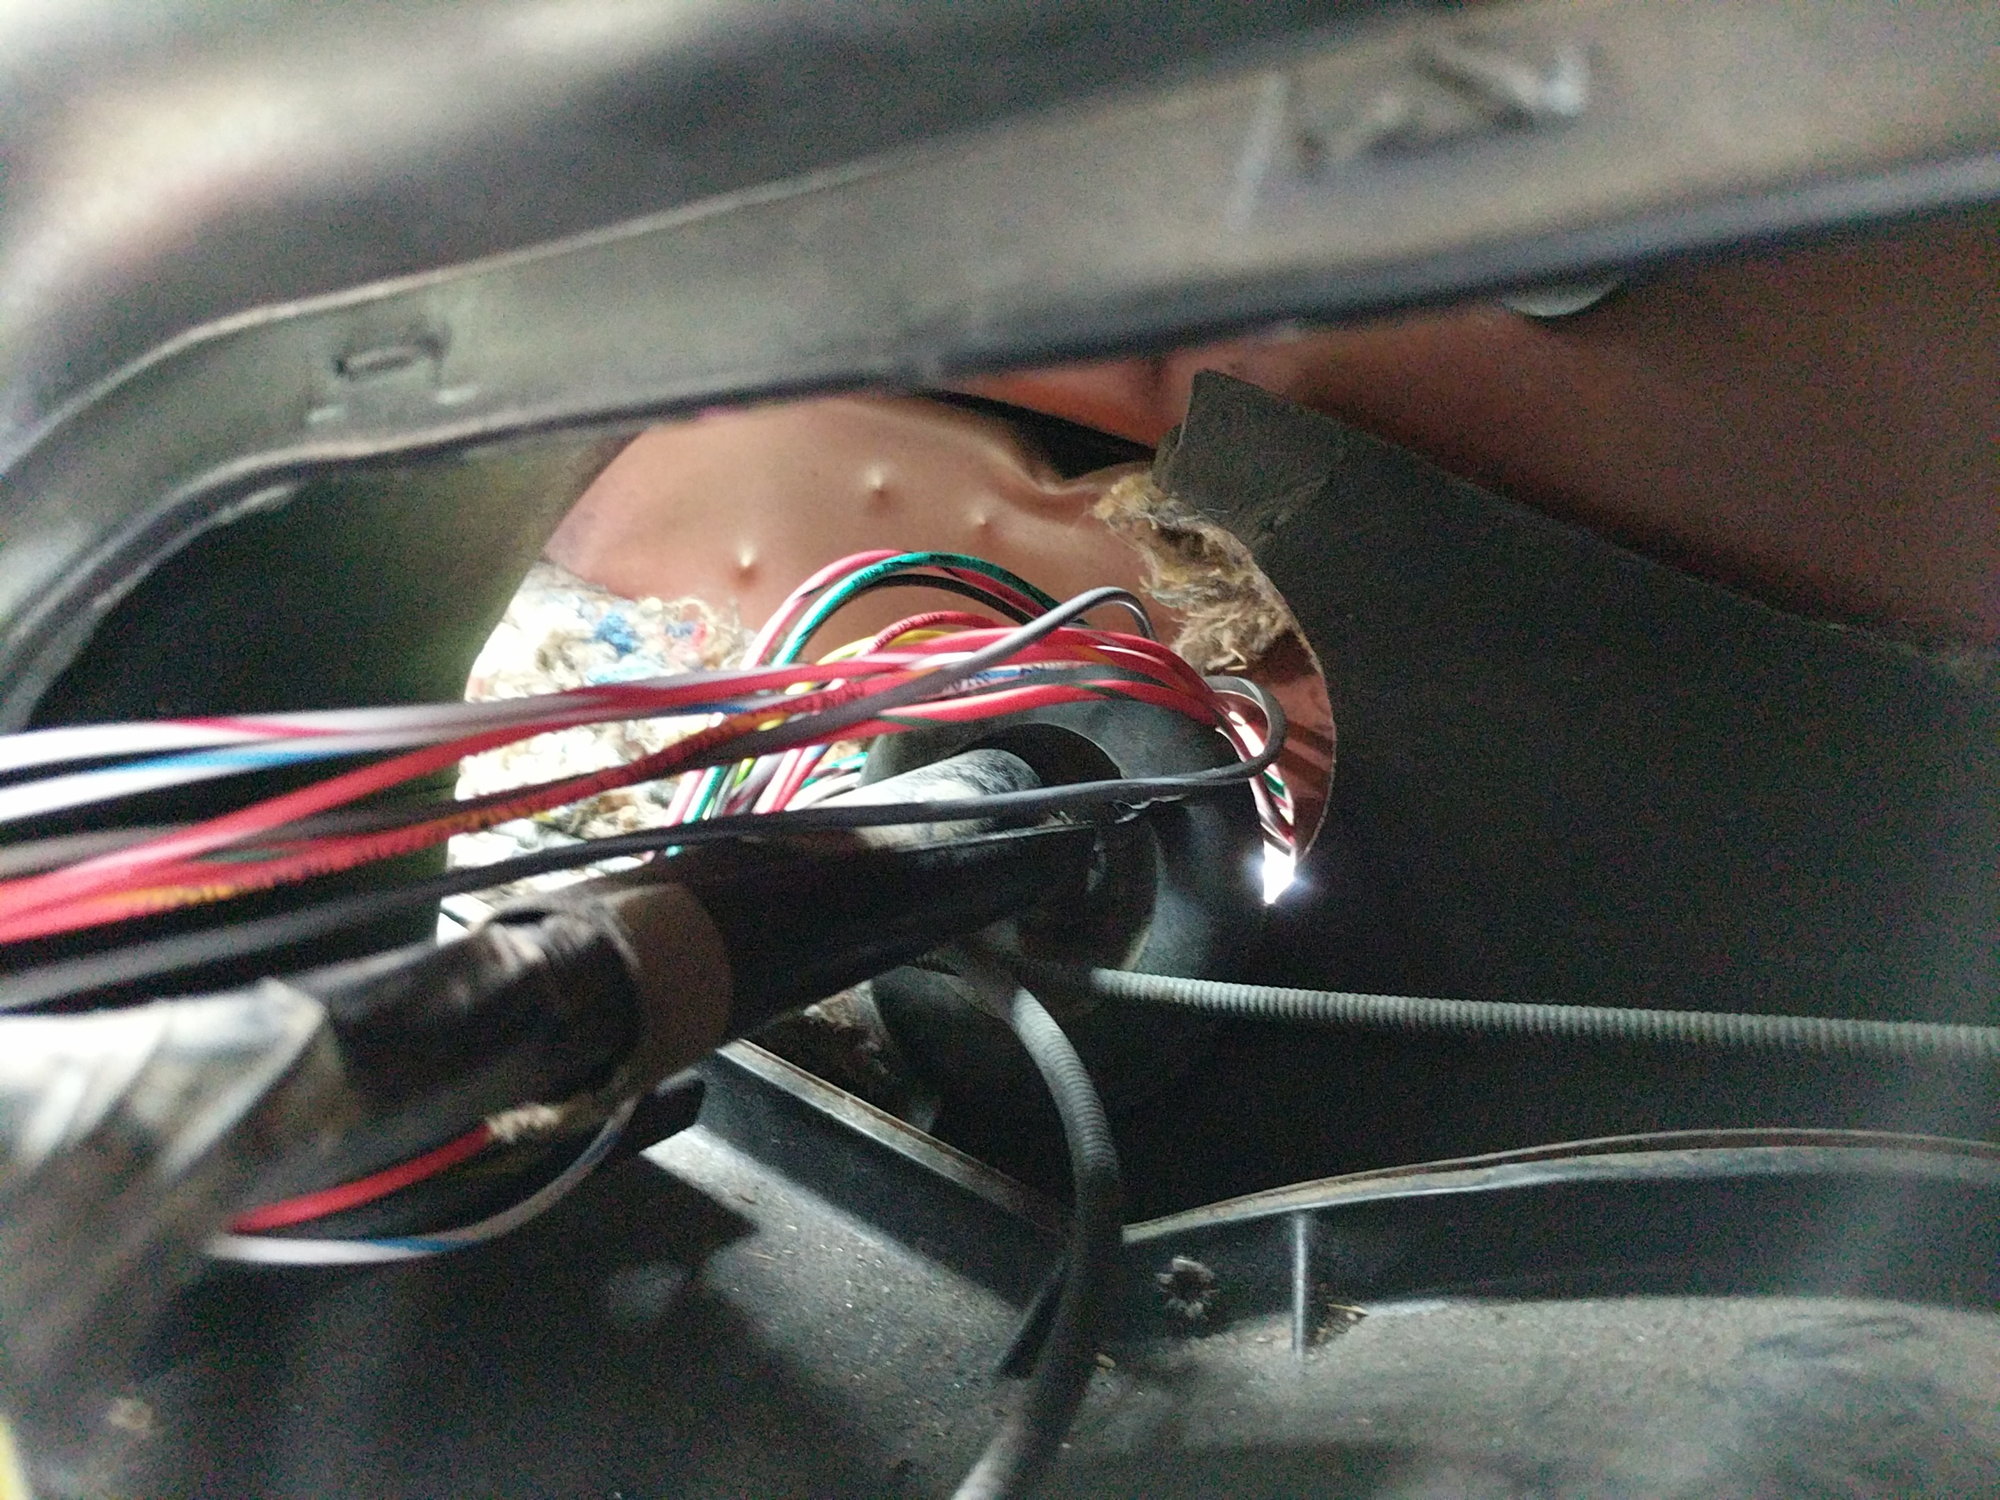 Install painless wiring harness - Ford Truck Enthusiasts Forums